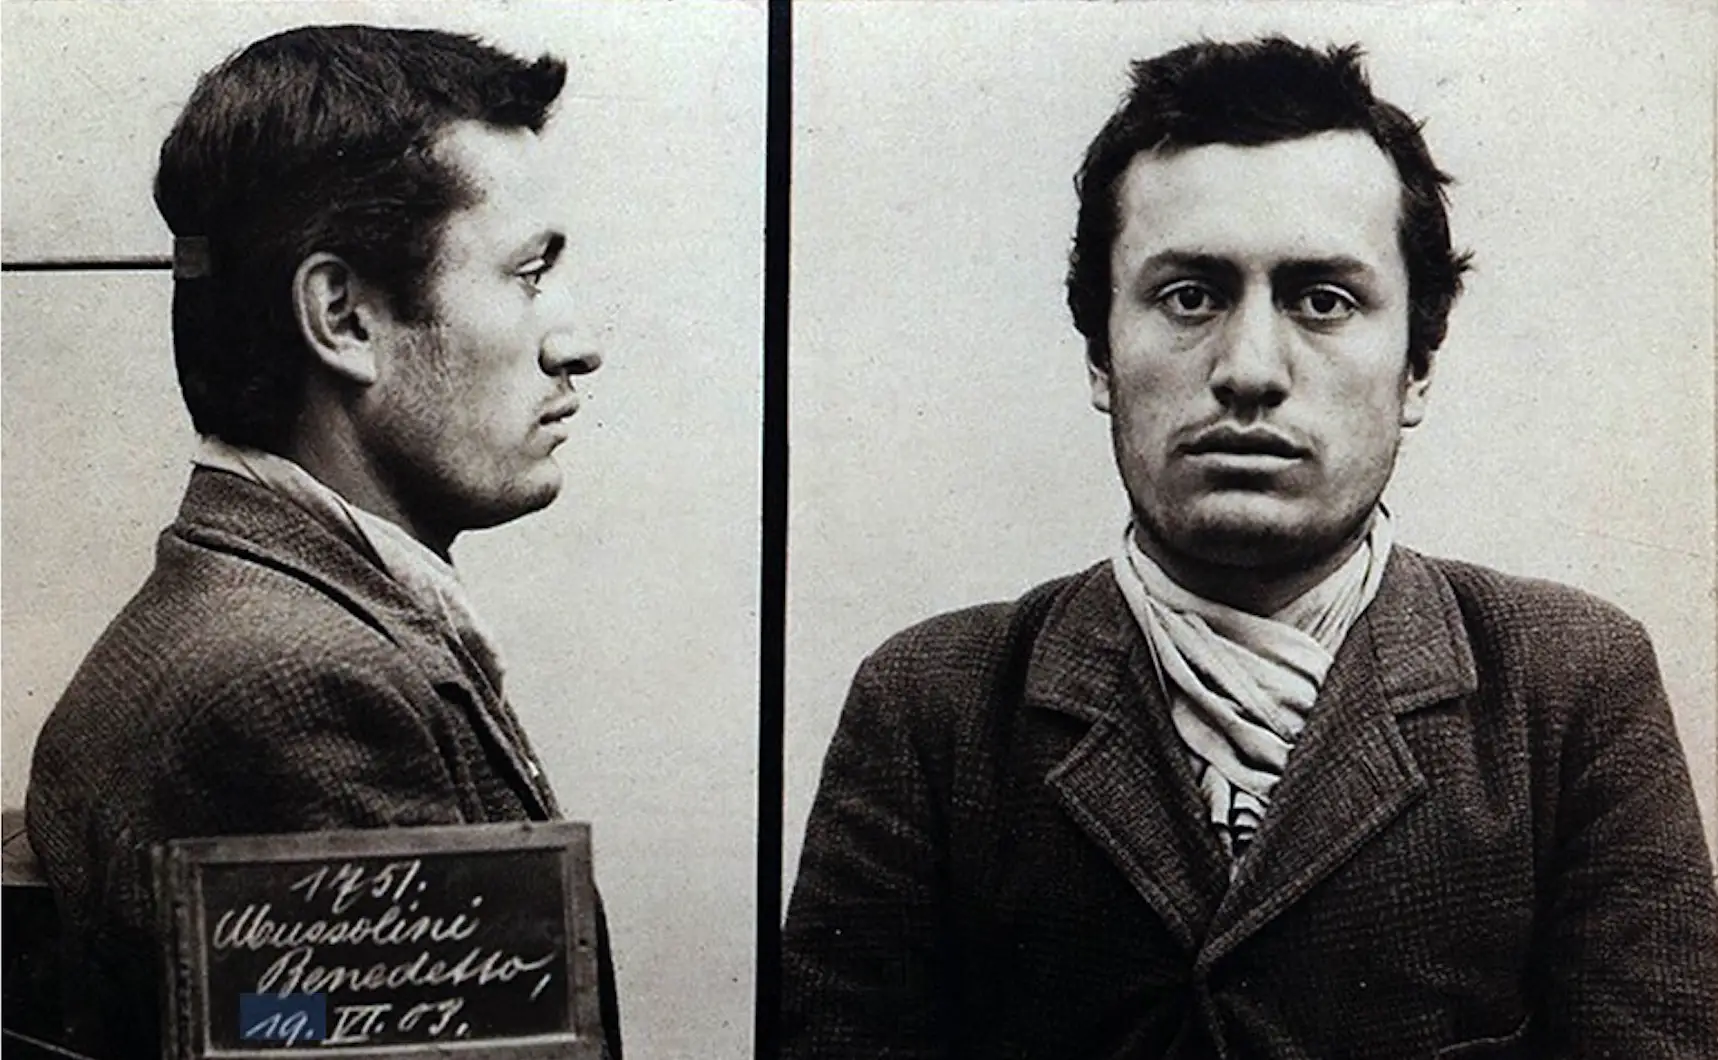 In the picture- the mugshot of Benito Mussolini after he got arrested by the swiss police